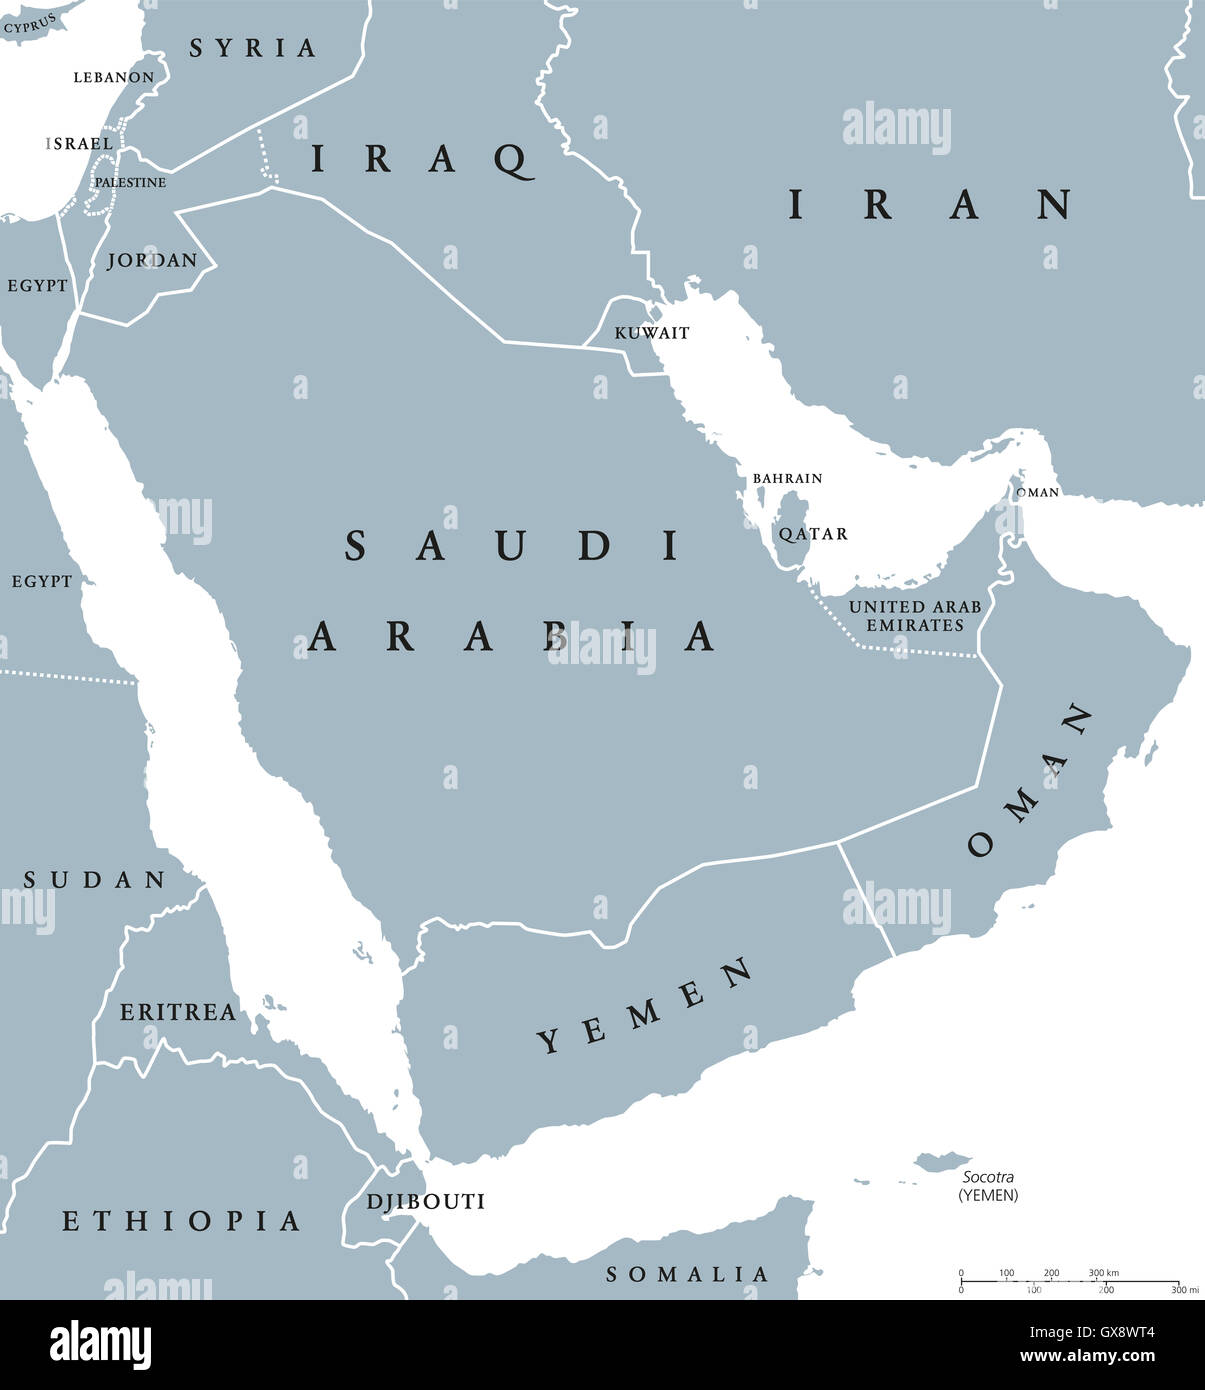 Arabian peninsula countries political map with national borders and single countries. Arabia is a peninsula of Western Asia. Stock Photo